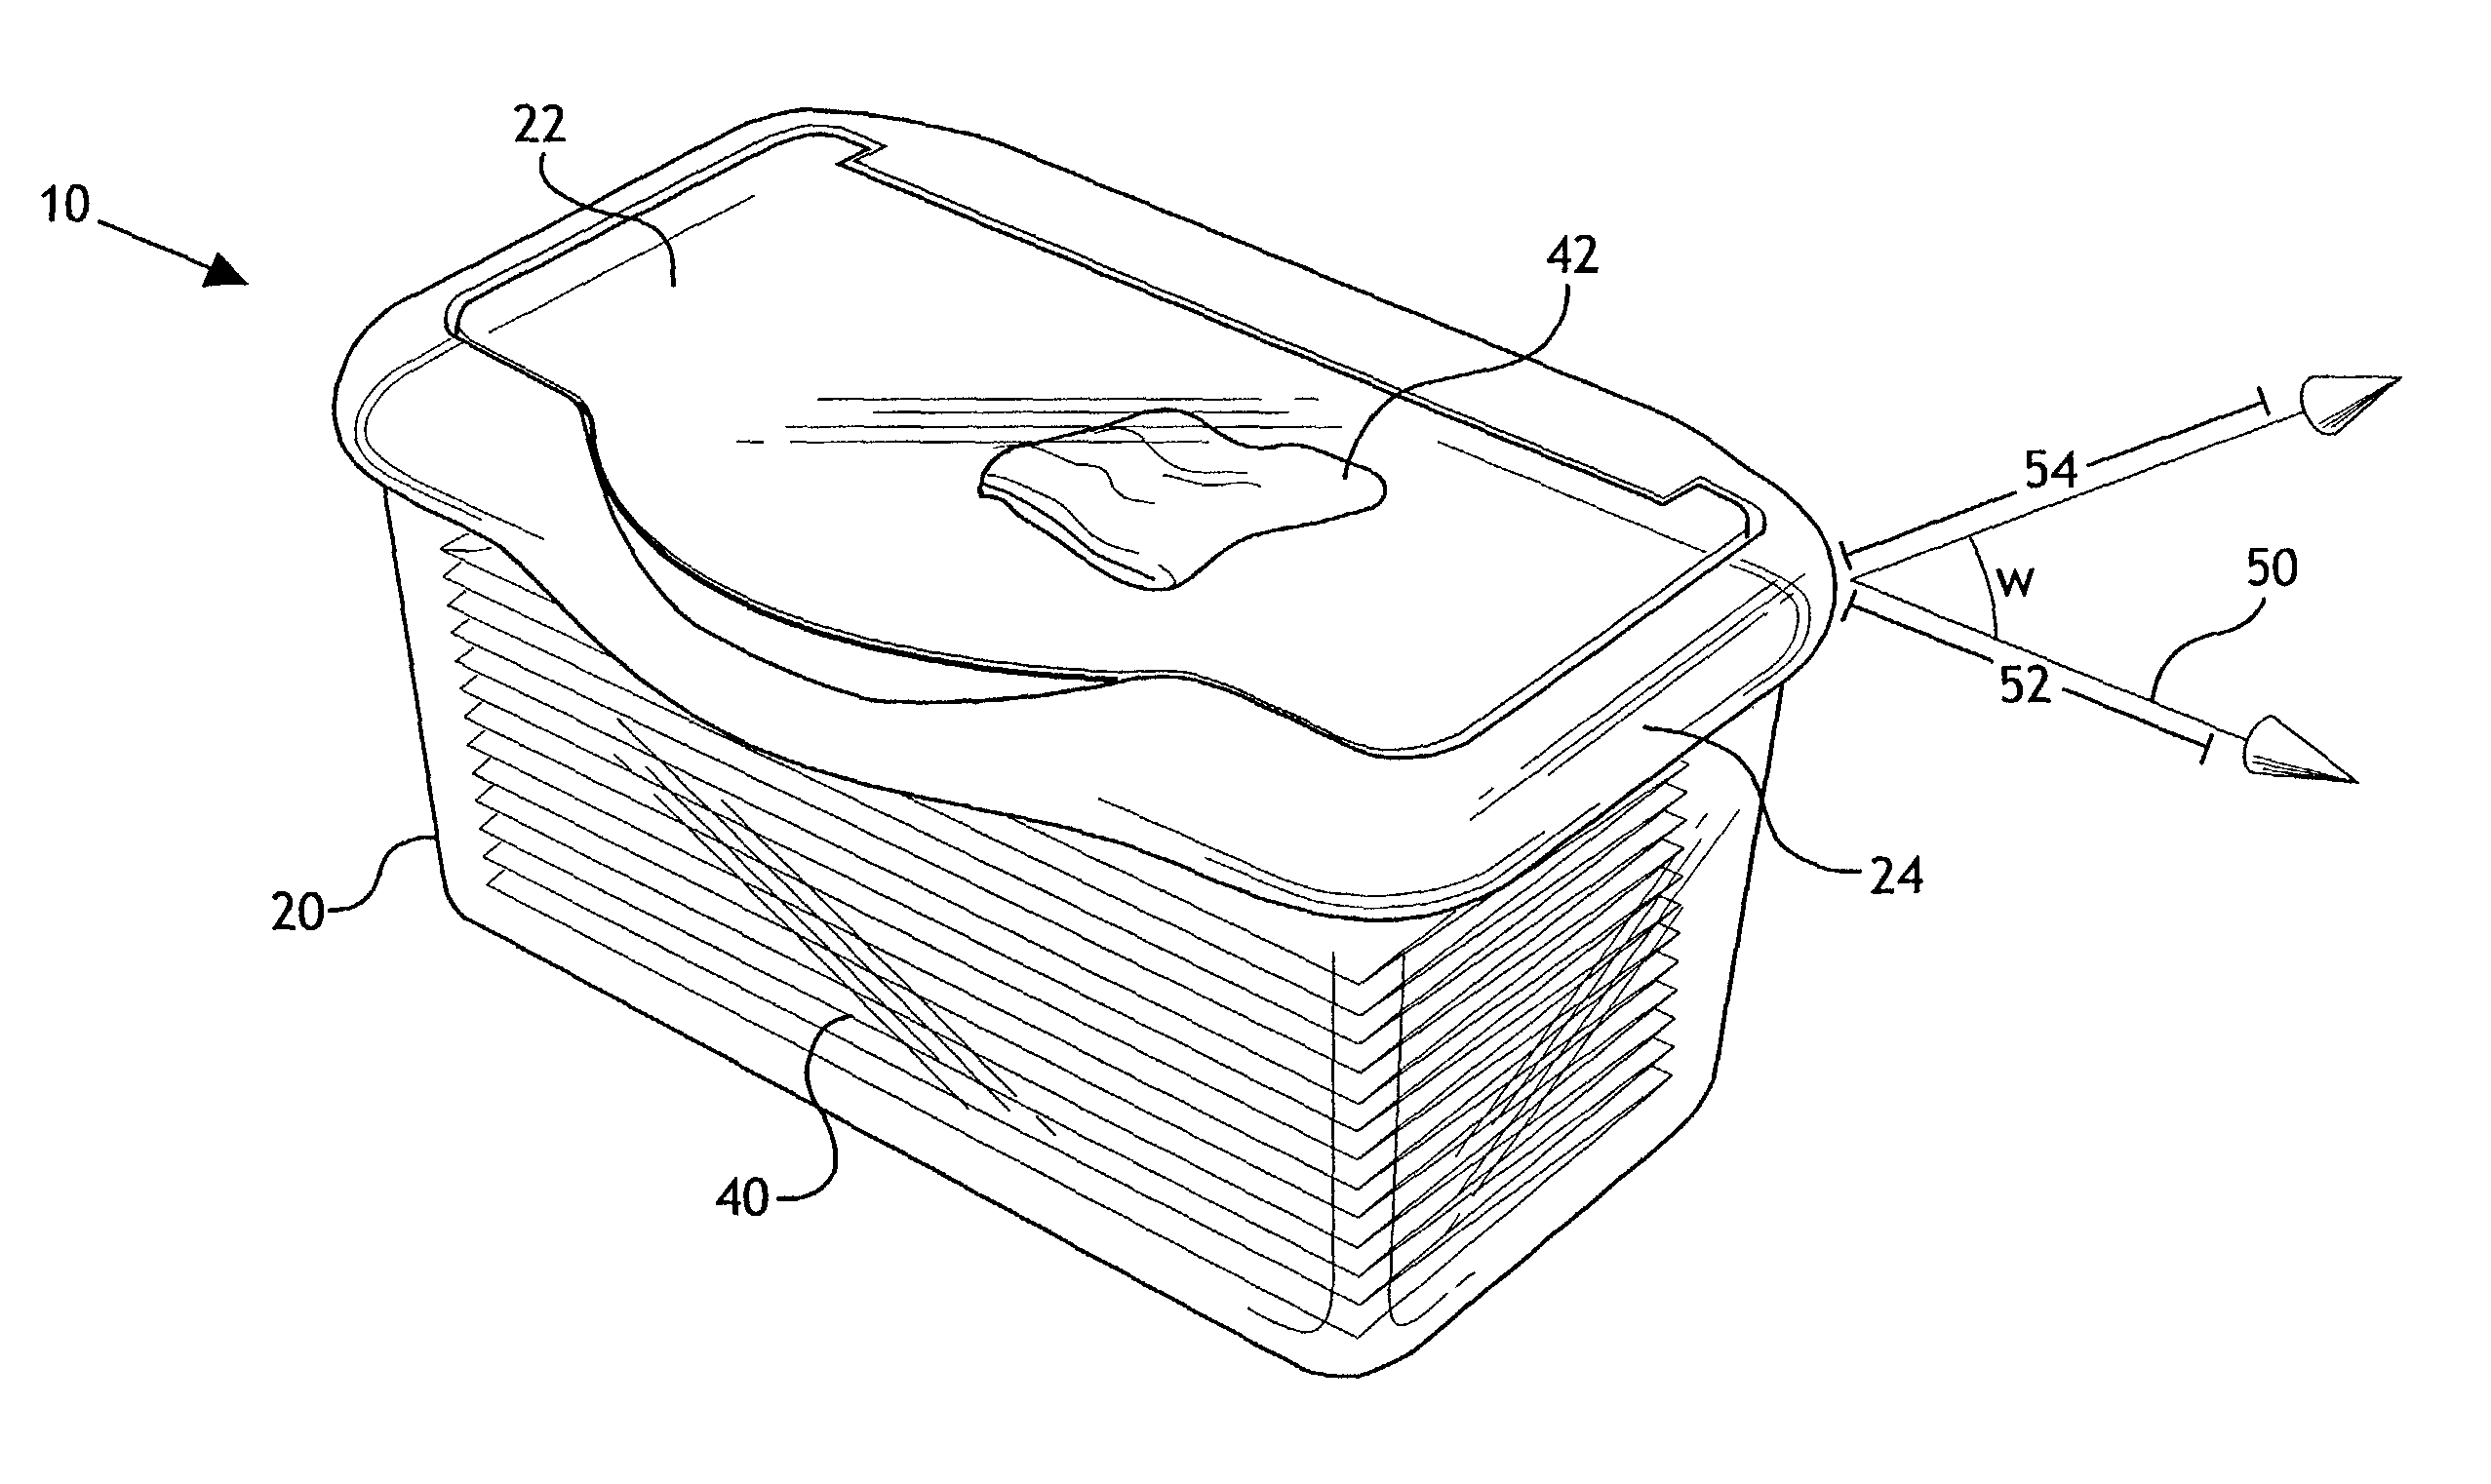 Package and method for storing and dispensing wet wipes in a pop-up format